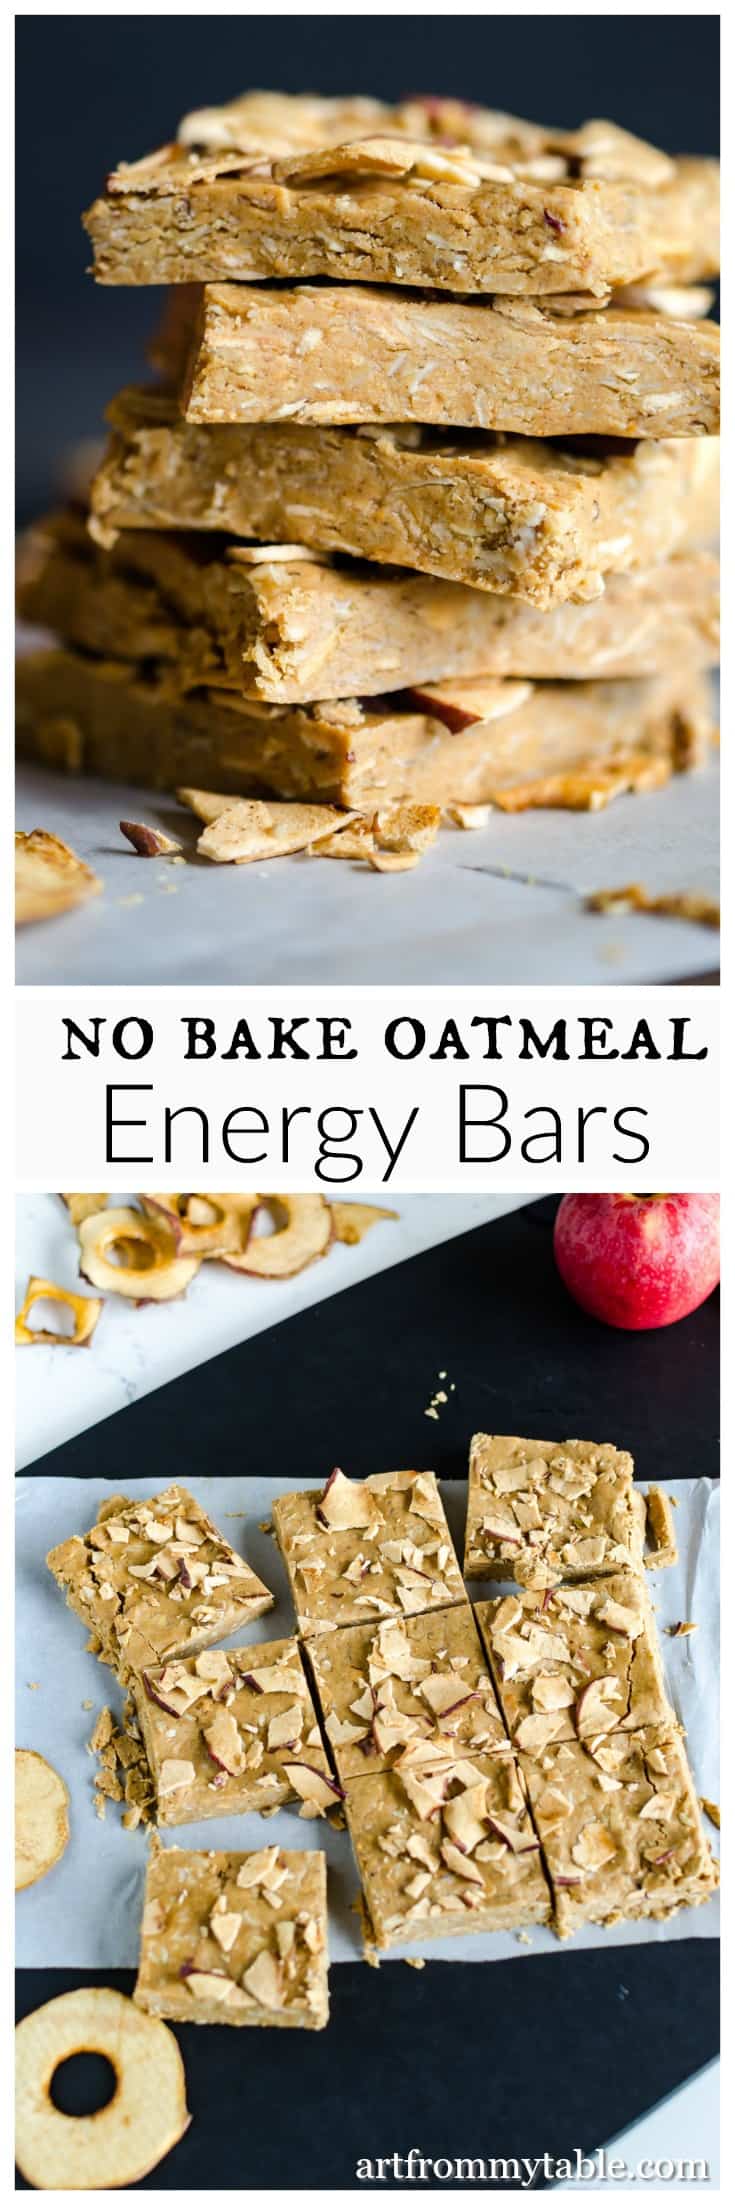 No Bake Oatmeal Energy Bars ~ All Natural ~ Peanut Butter & Apple Chips